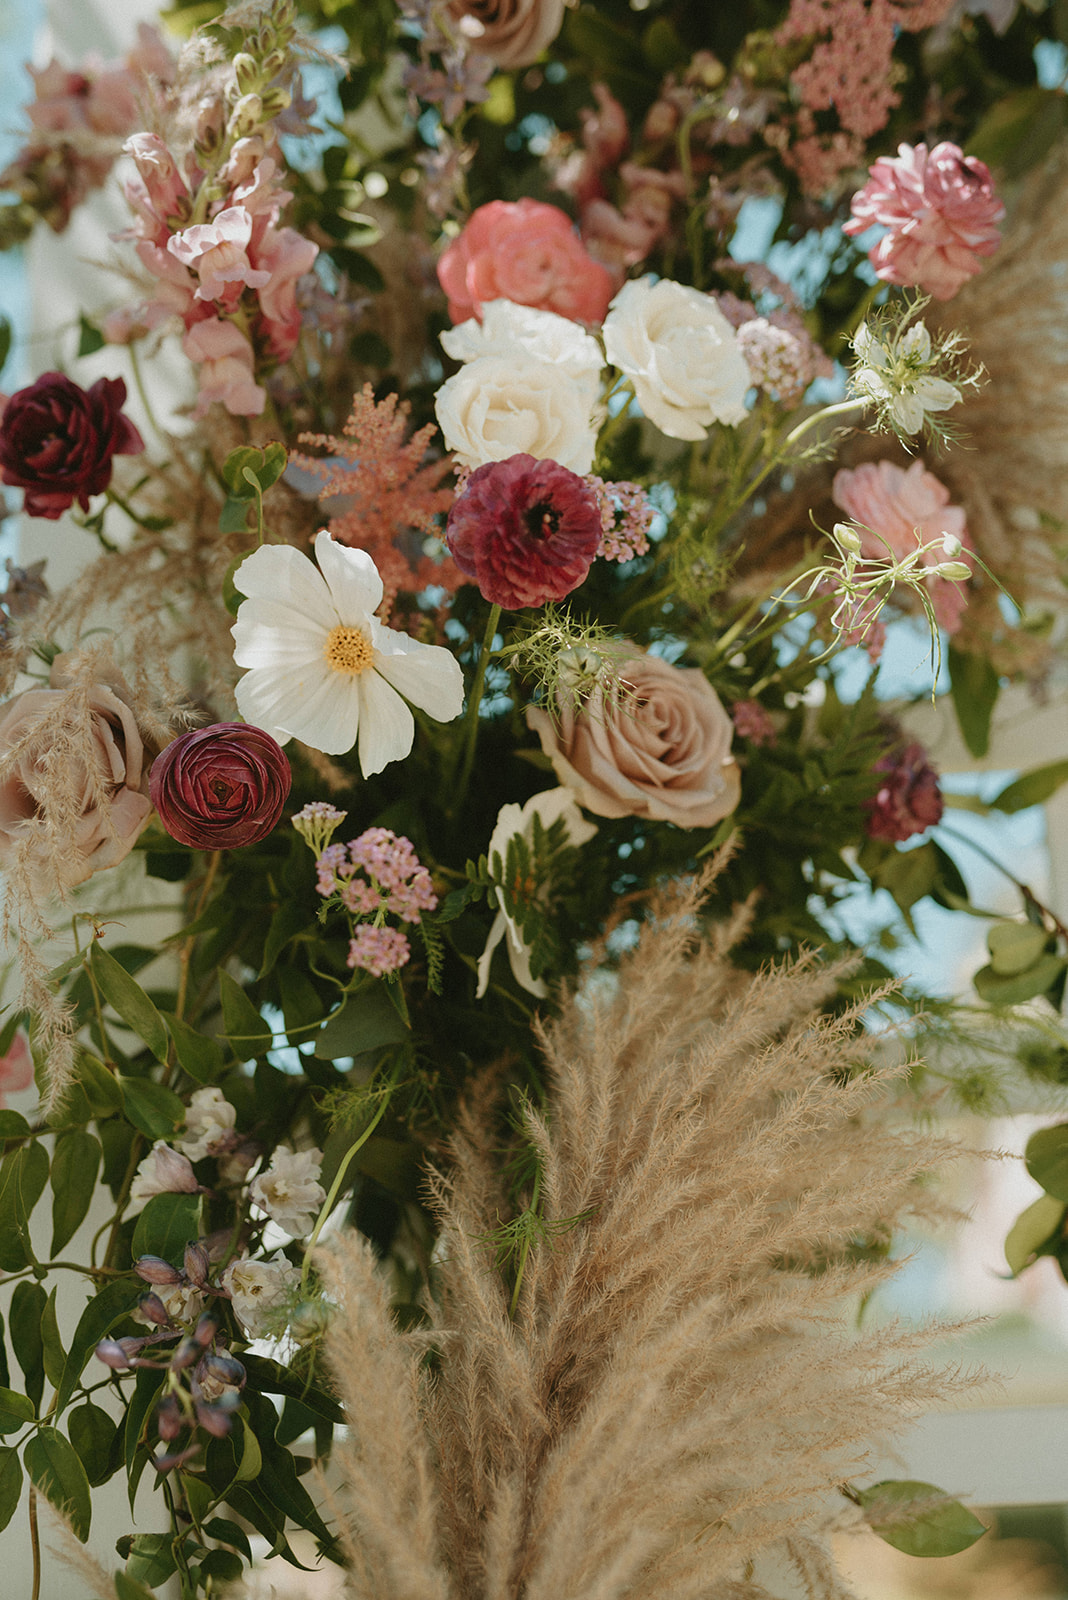 Wedding floral inspiration with pink, berry, gold and white blooms by Flowers by Janie